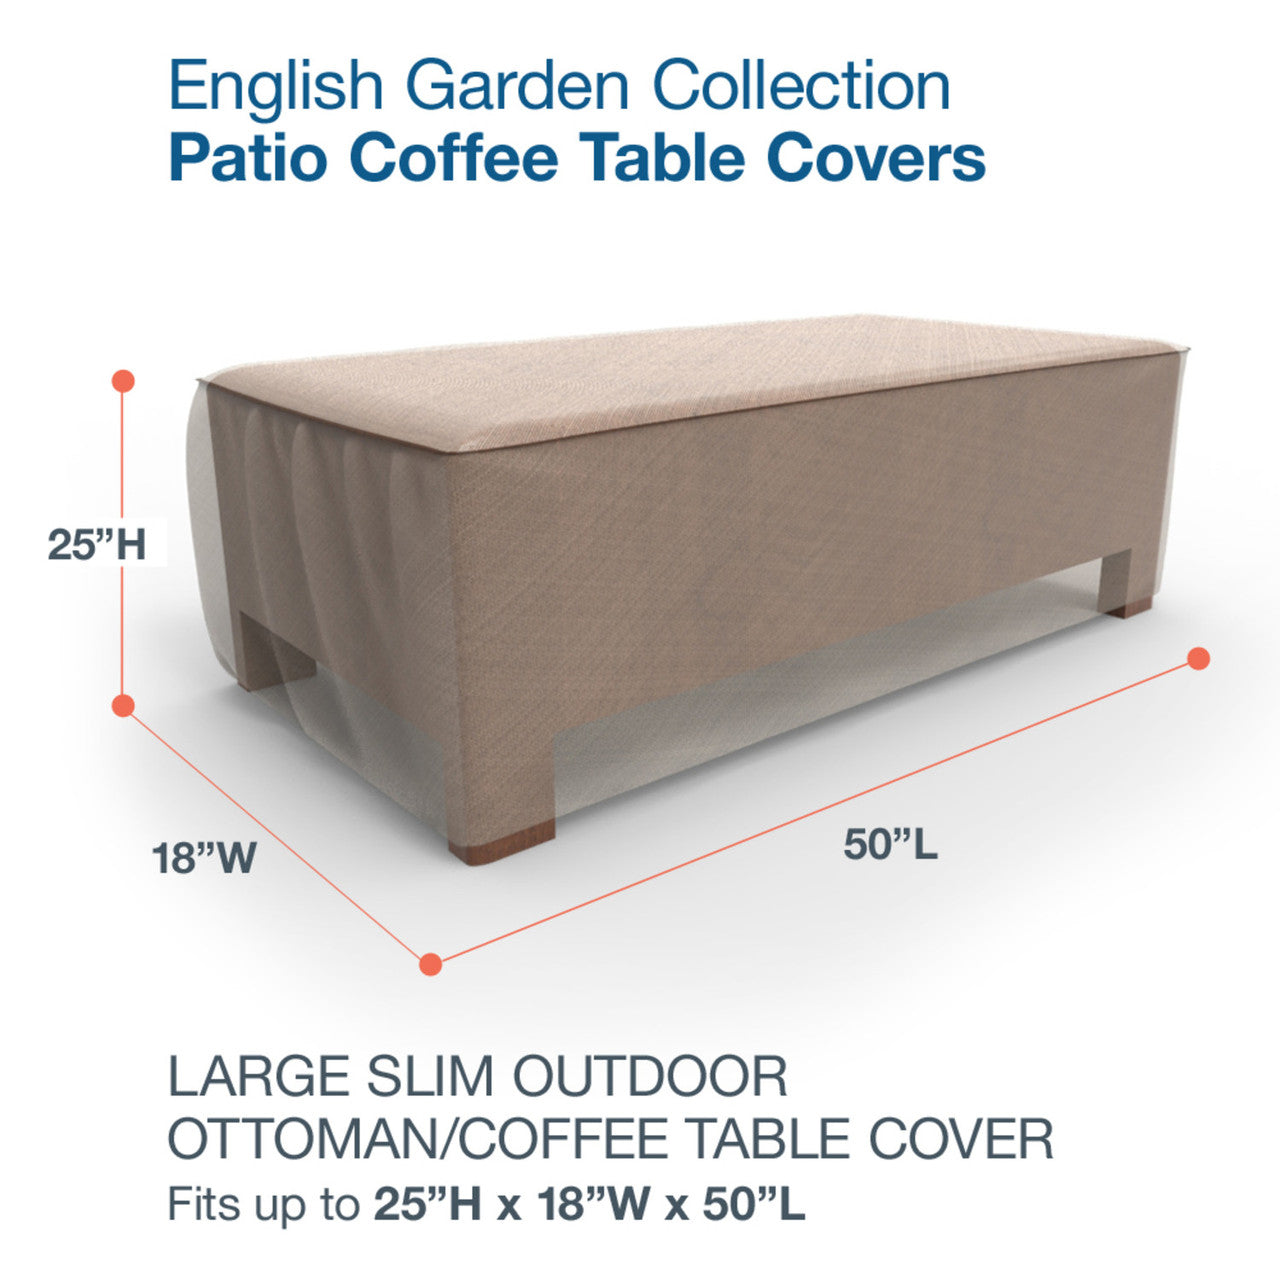 Budge Industries English Garden Slim Patio Ottoman/Coffee Table Cover - Large